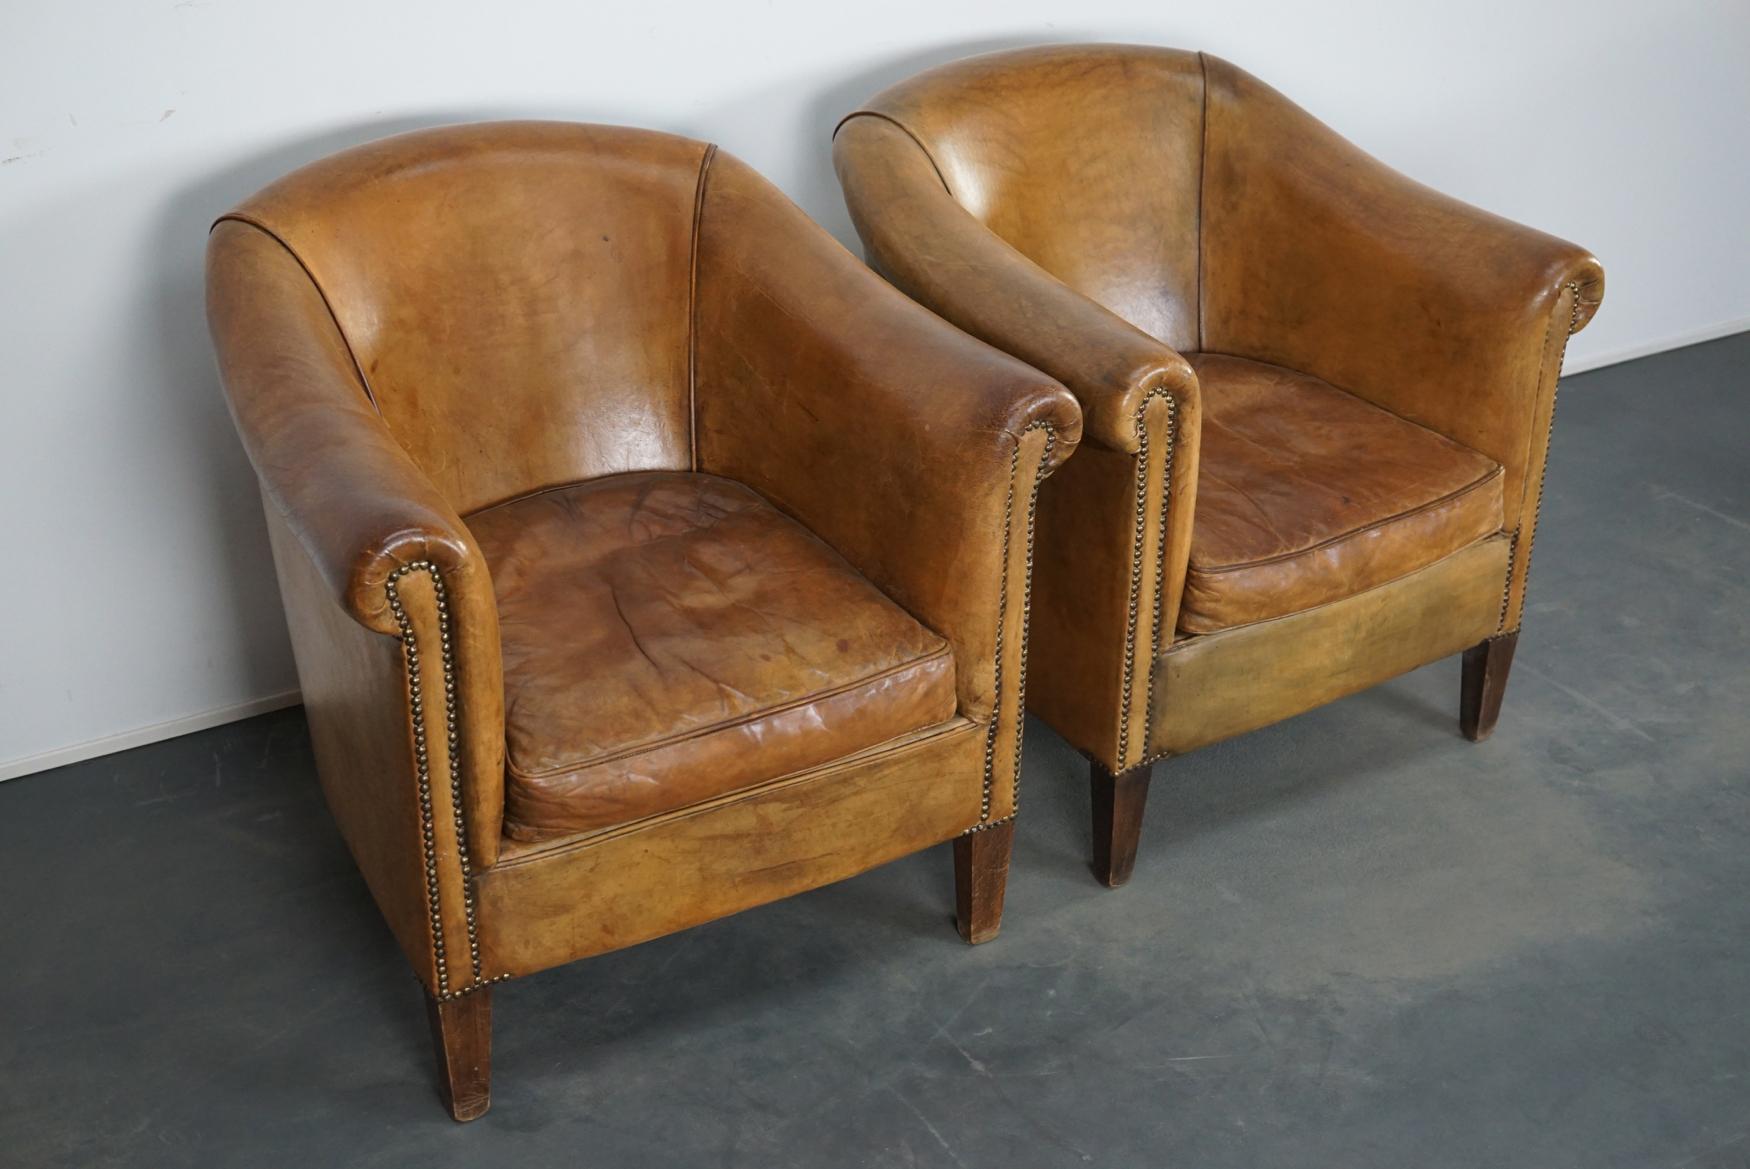 Industrial Vintage Dutch Cognac-Colored Leather Club Chair, Set of 2